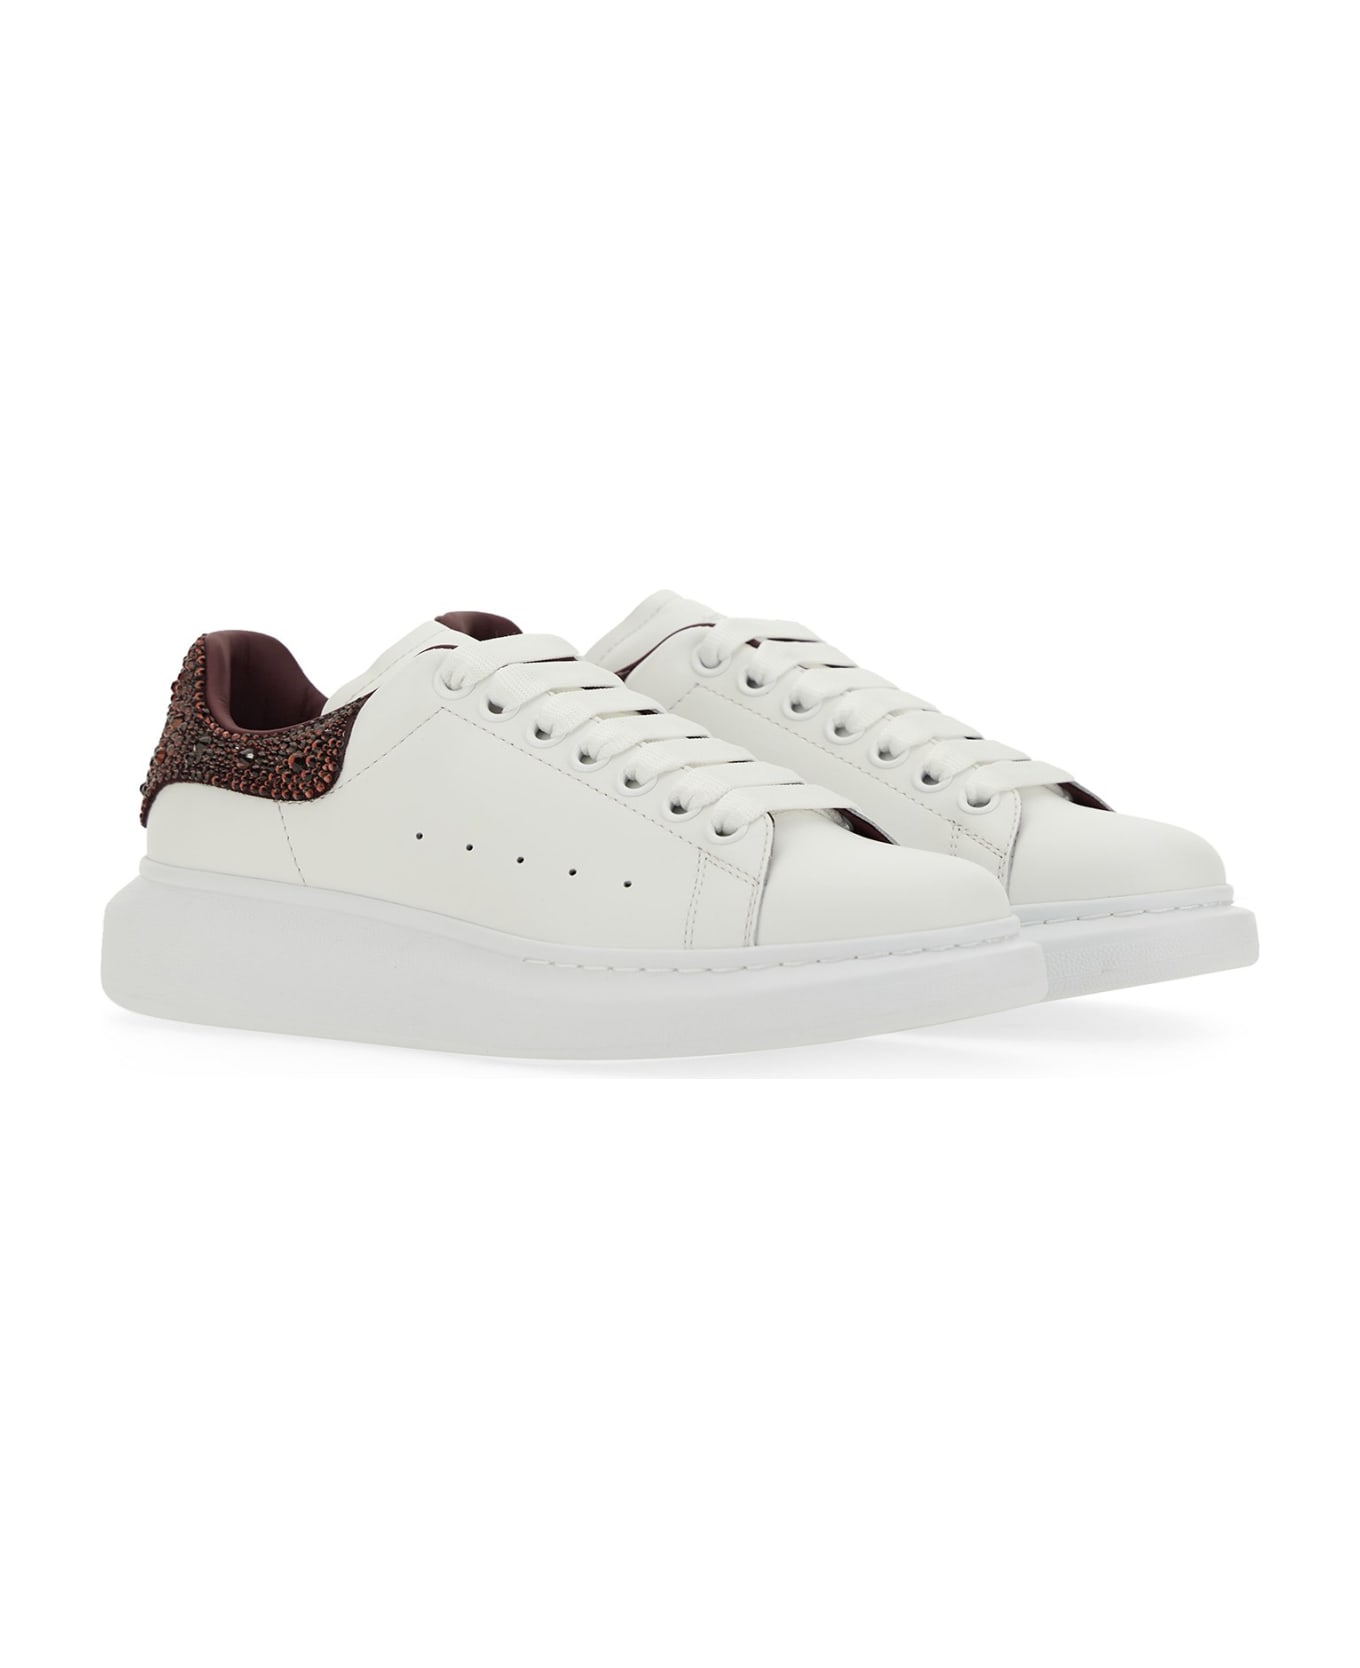 Alexander McQueen Oversized Sneakers In White And Dark Burgundy With Rhinestones - White